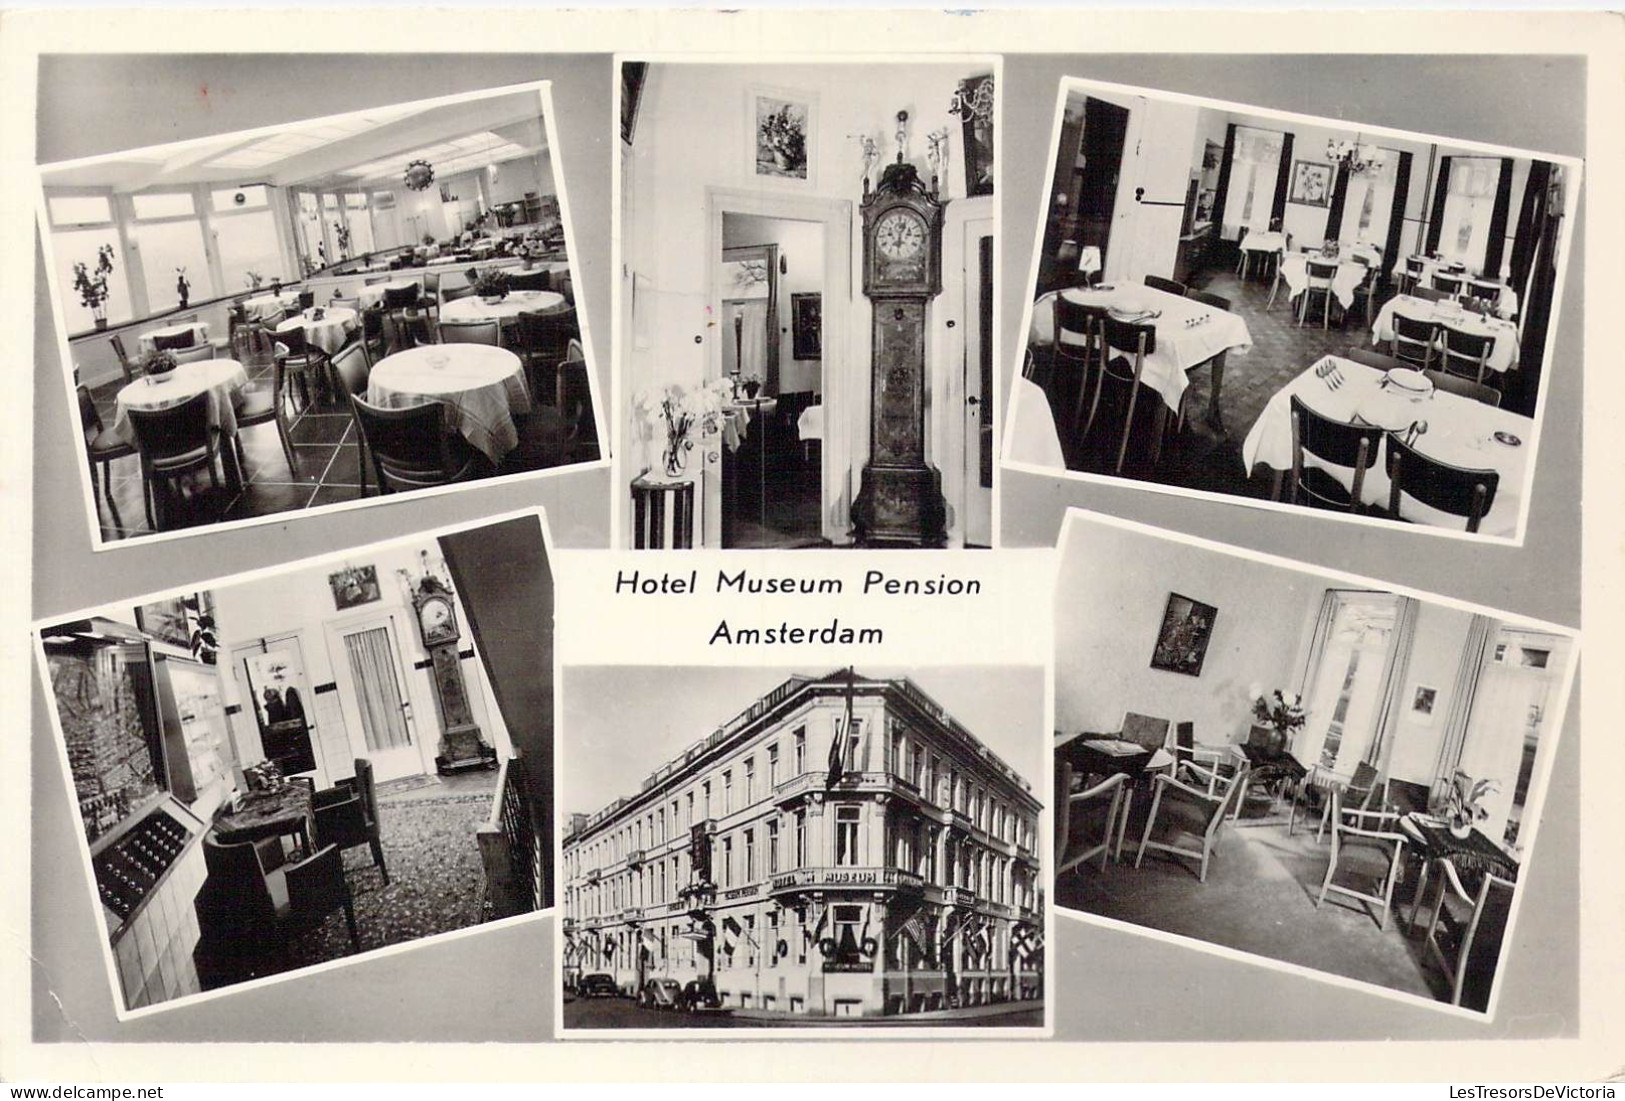 PAYS-BAS - Amsterdam - Hotel Museum Pension - Carte Postale Ancienne - Amsterdam